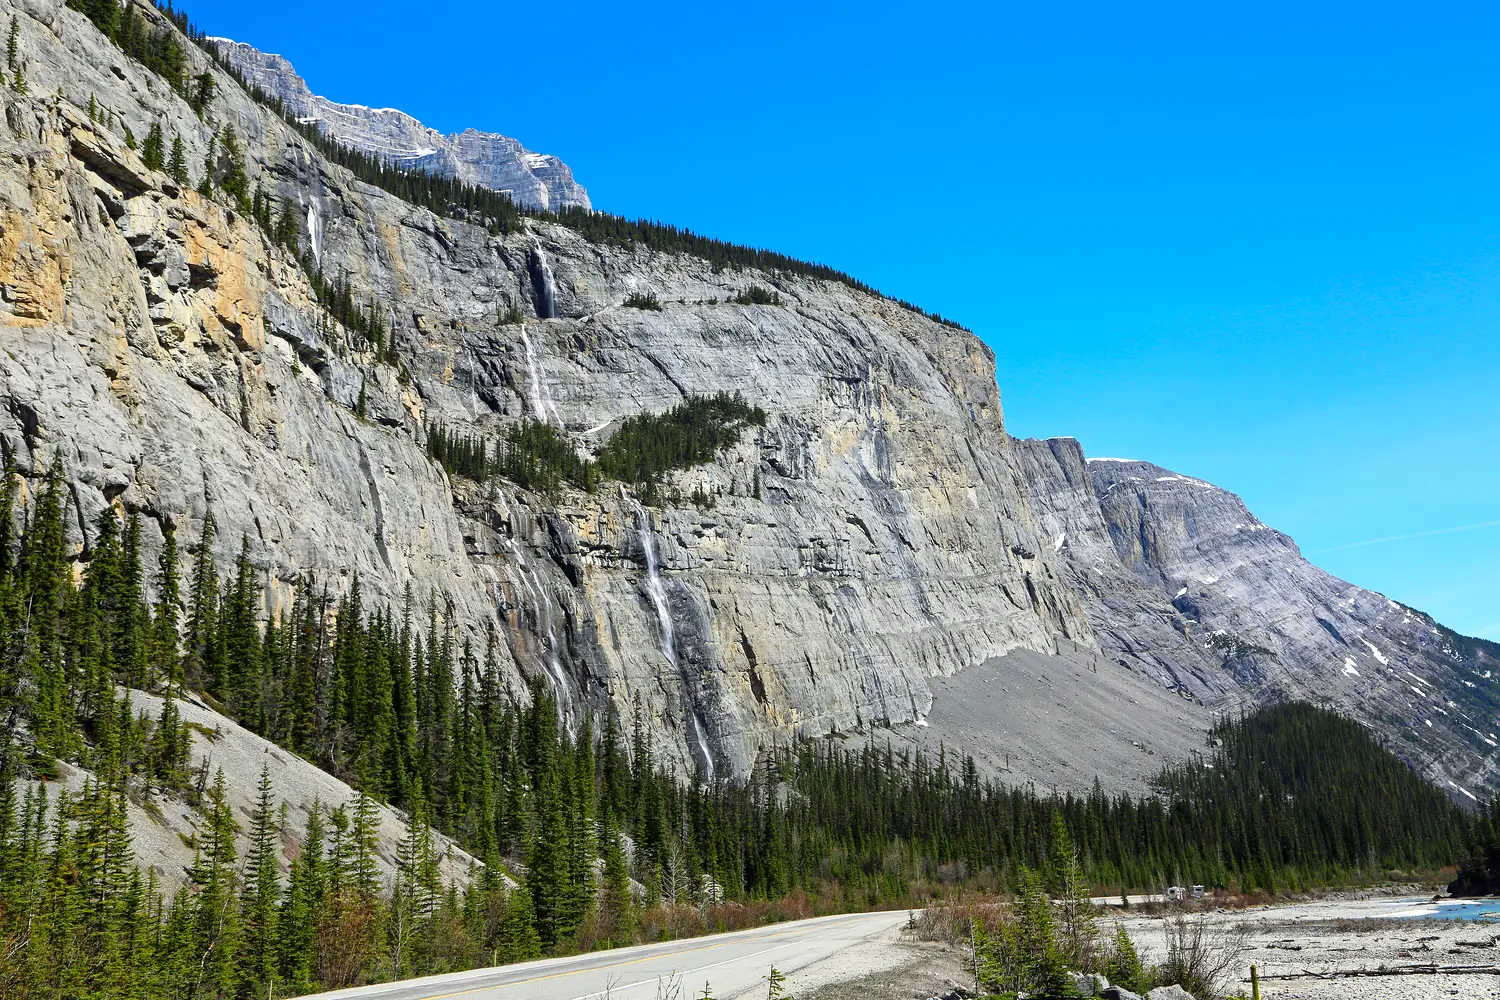 Weeping Wall and Icefield Parkway - Banff National Park, Alberta, Canada